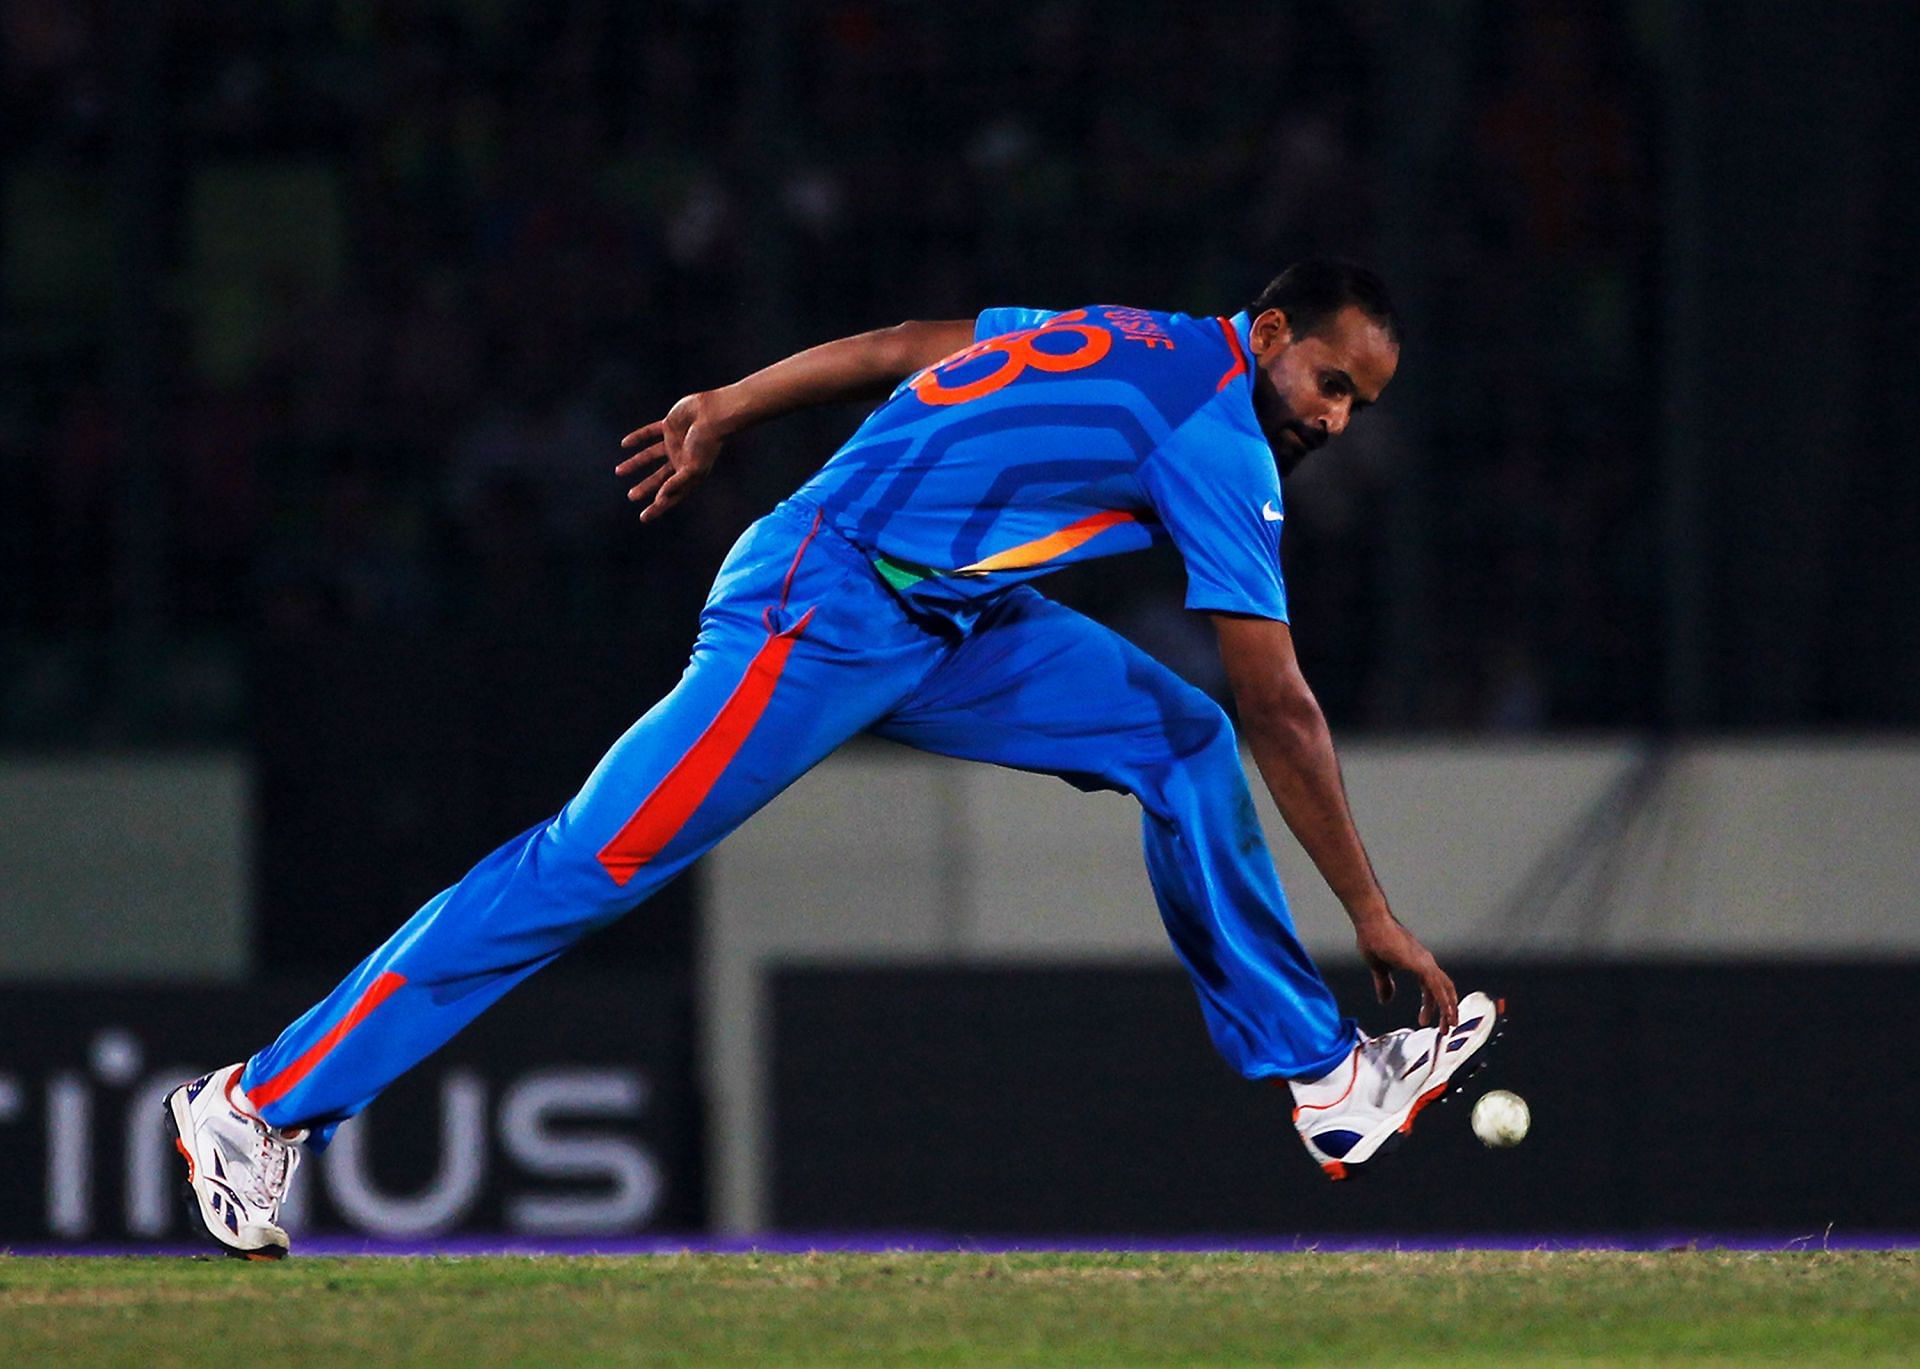 Yusuf Pathan played for India in the ICC Cricket World Cup 2011 (Image Courtesy: Getty Images)